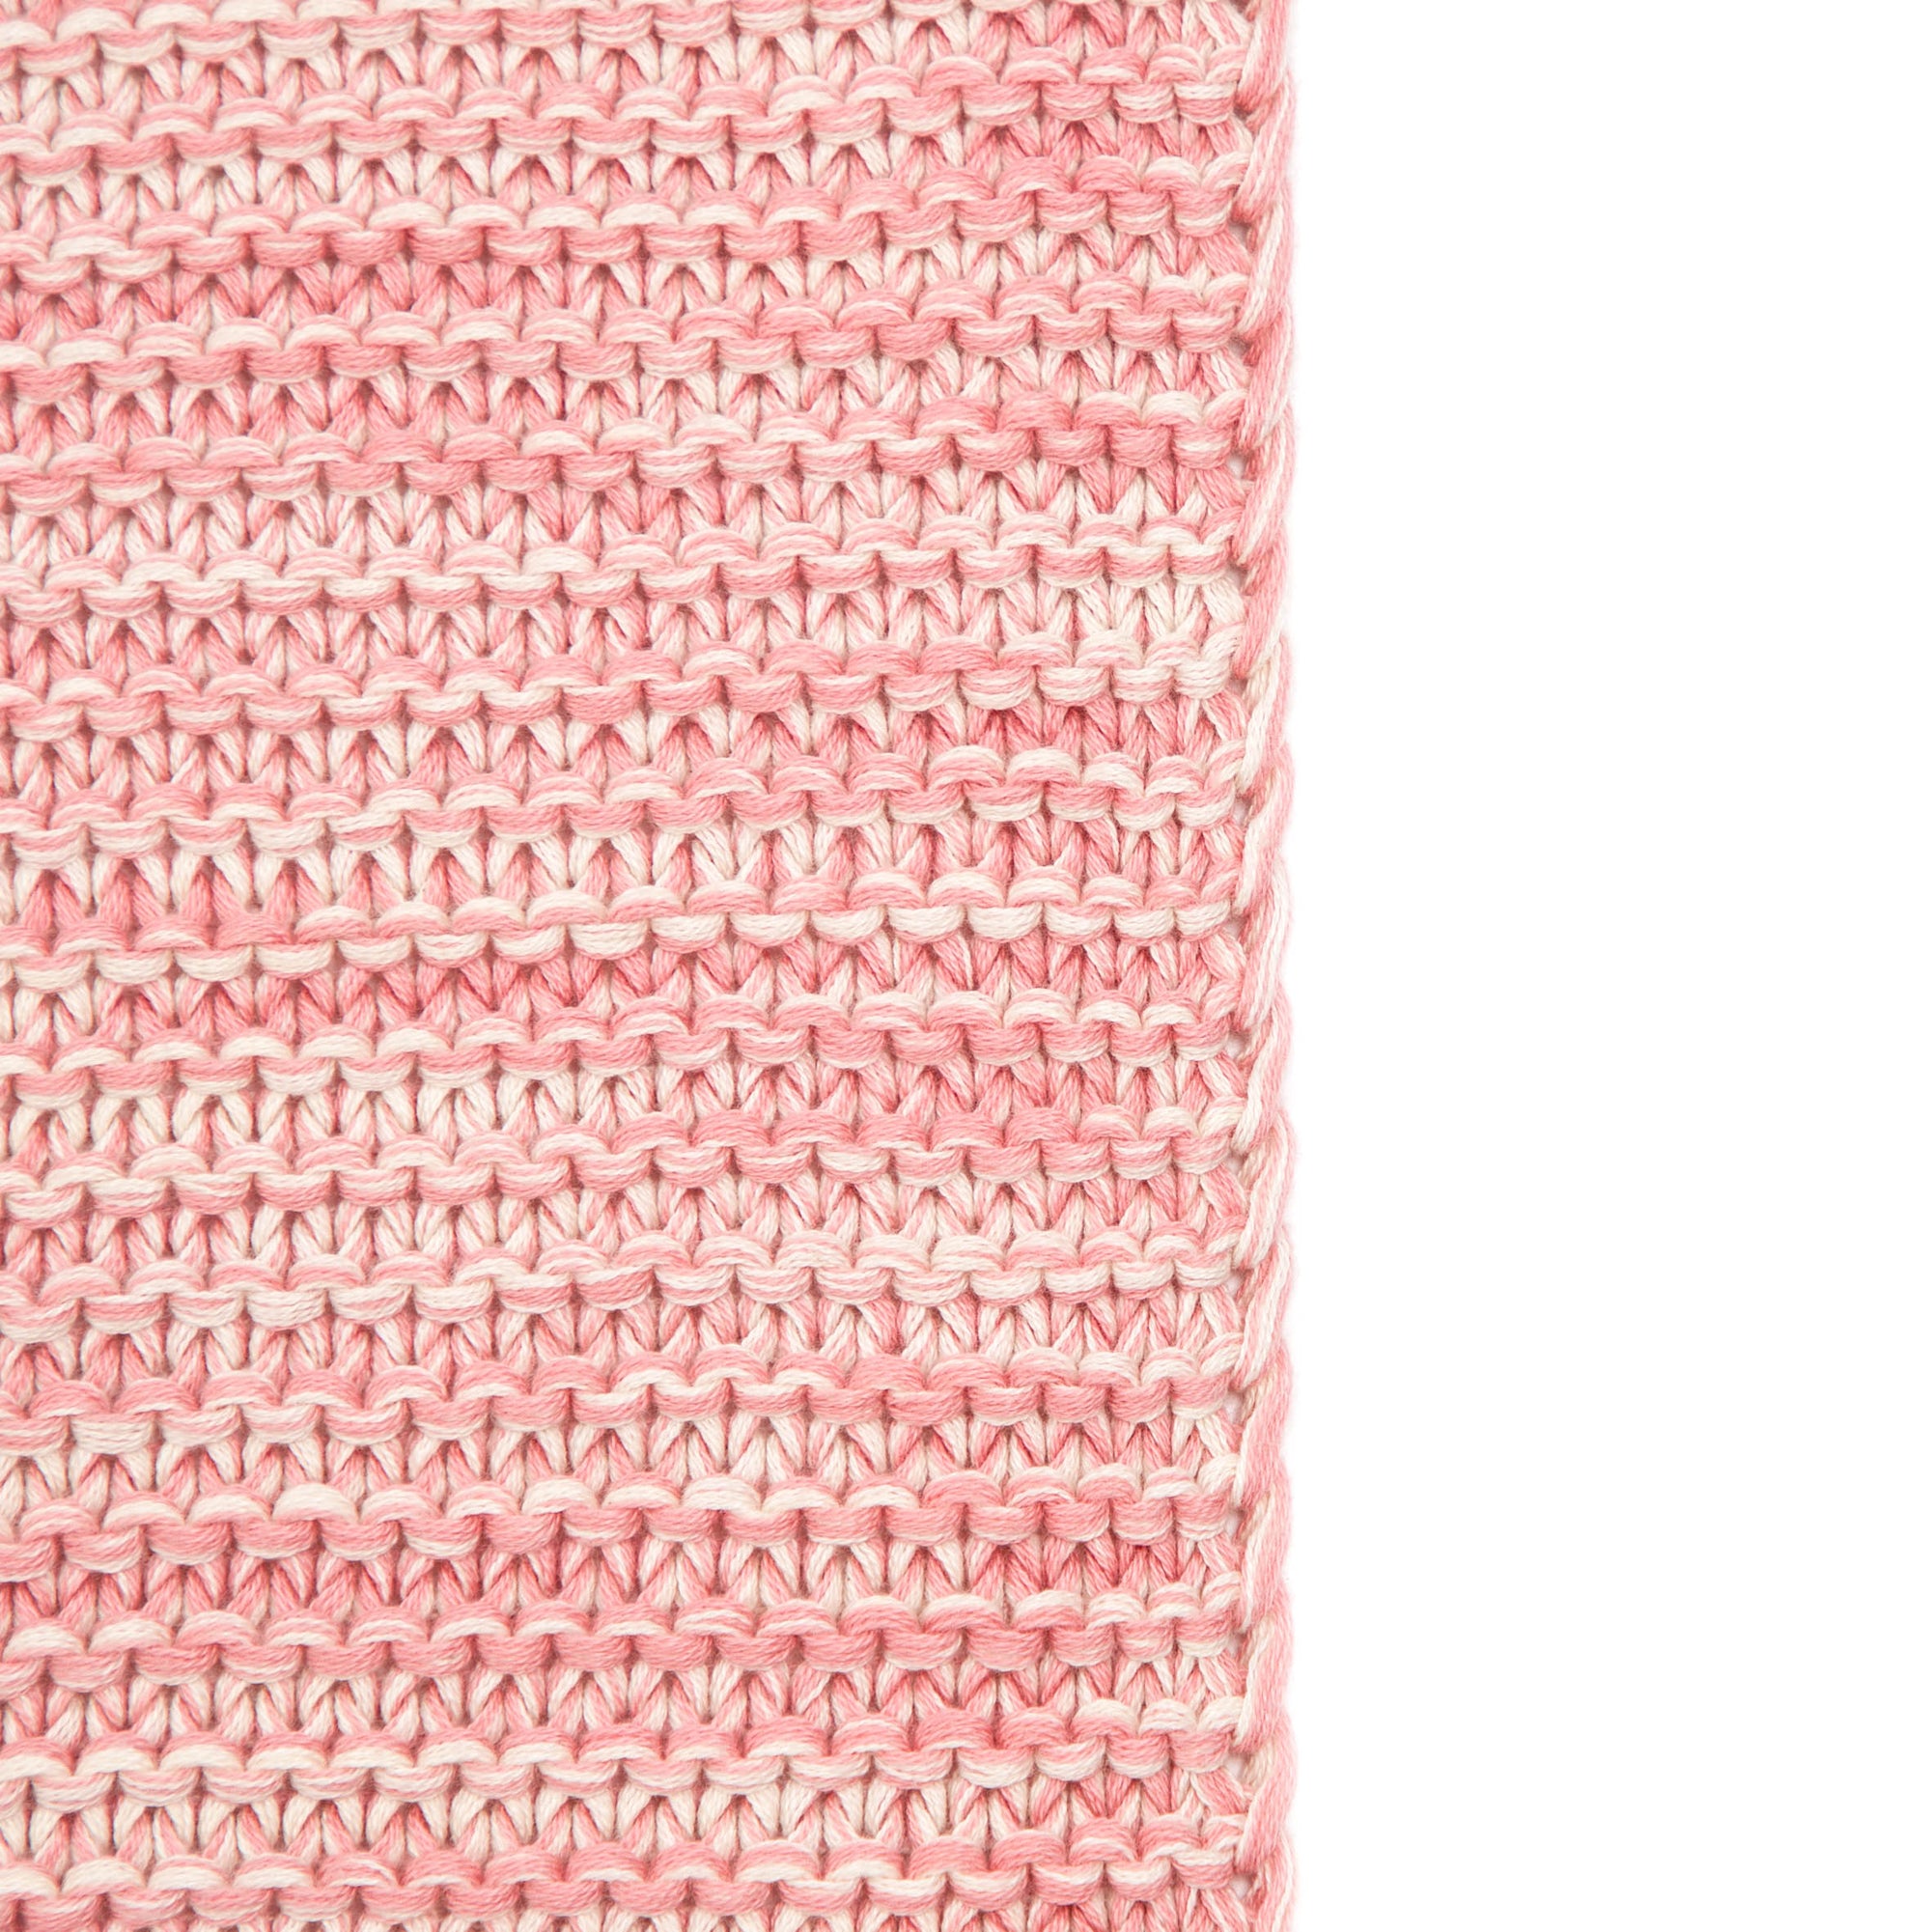 Saturday Park Pink Knitted Throw Blanket